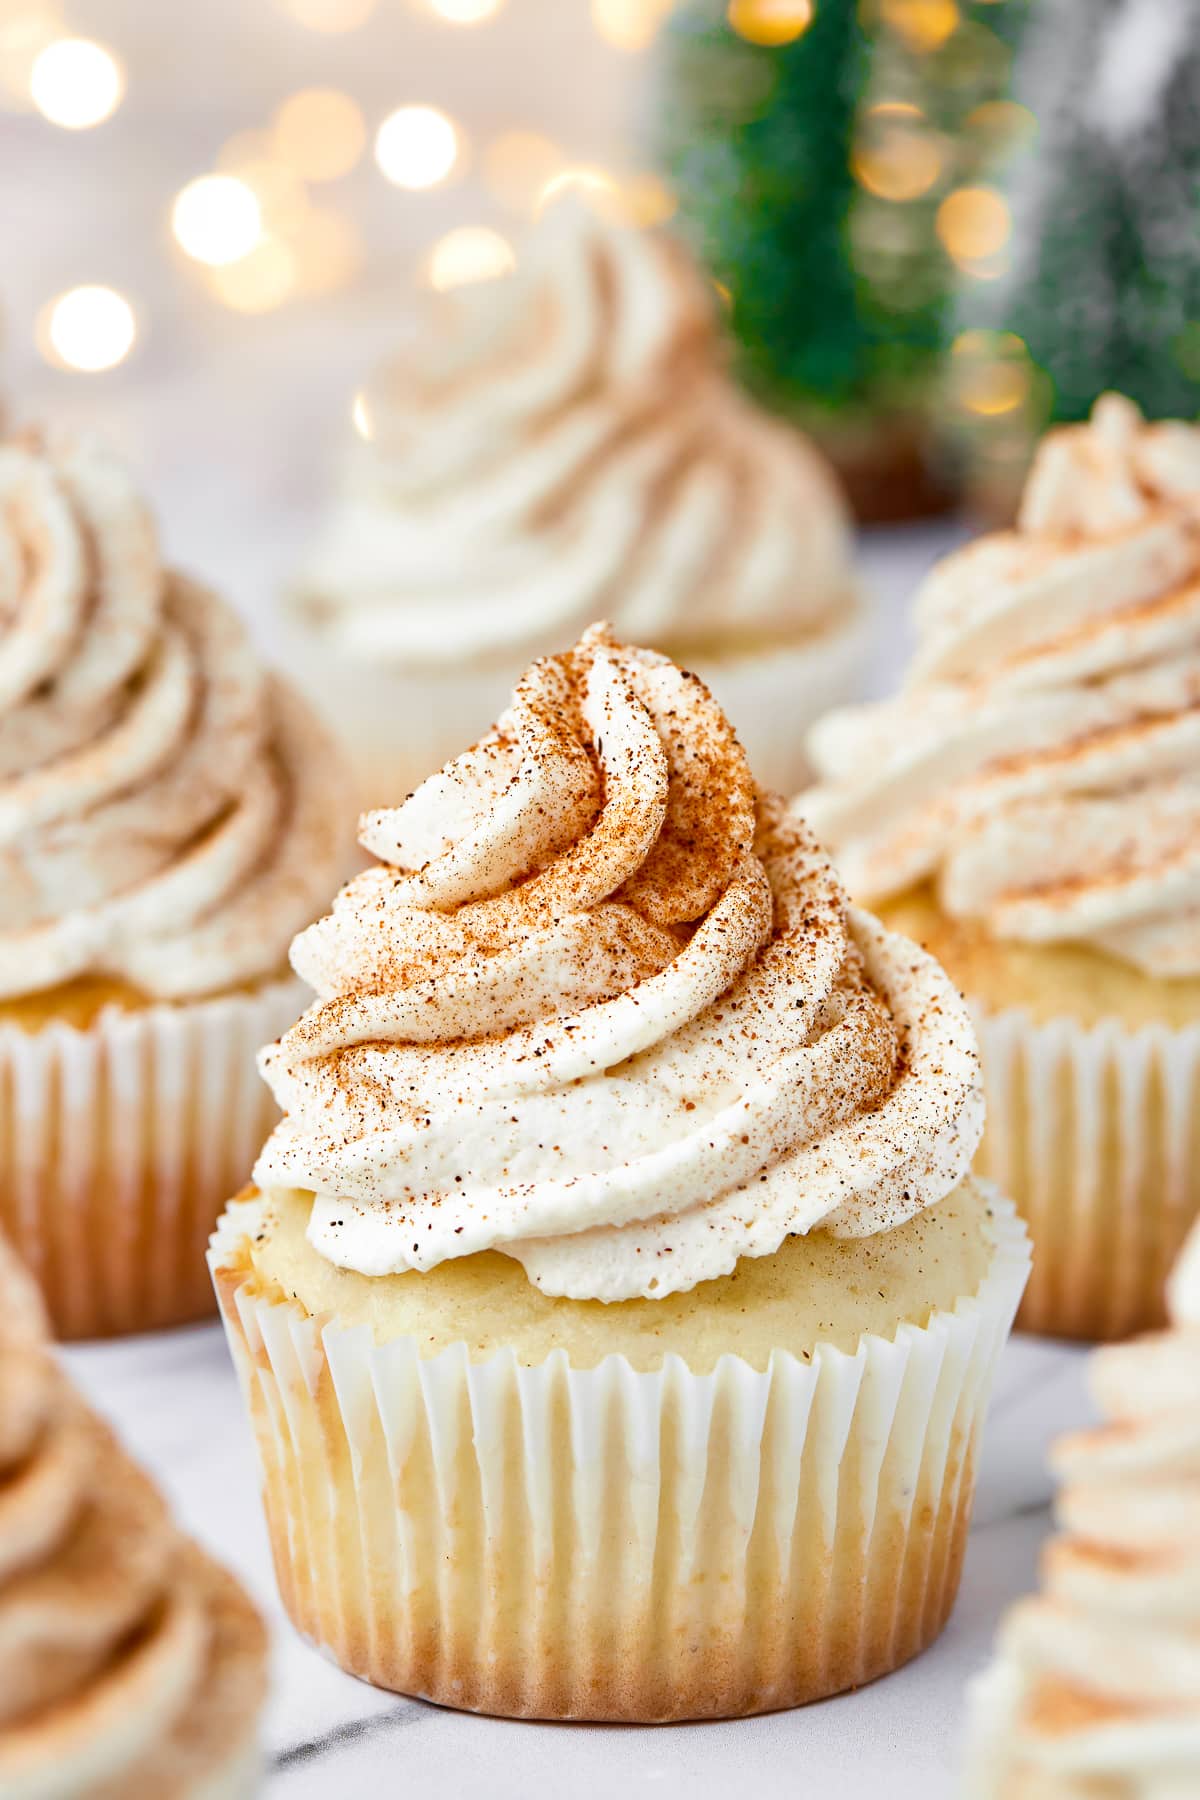 Close up of one of the Eggnog Cupcakes topped with spices.